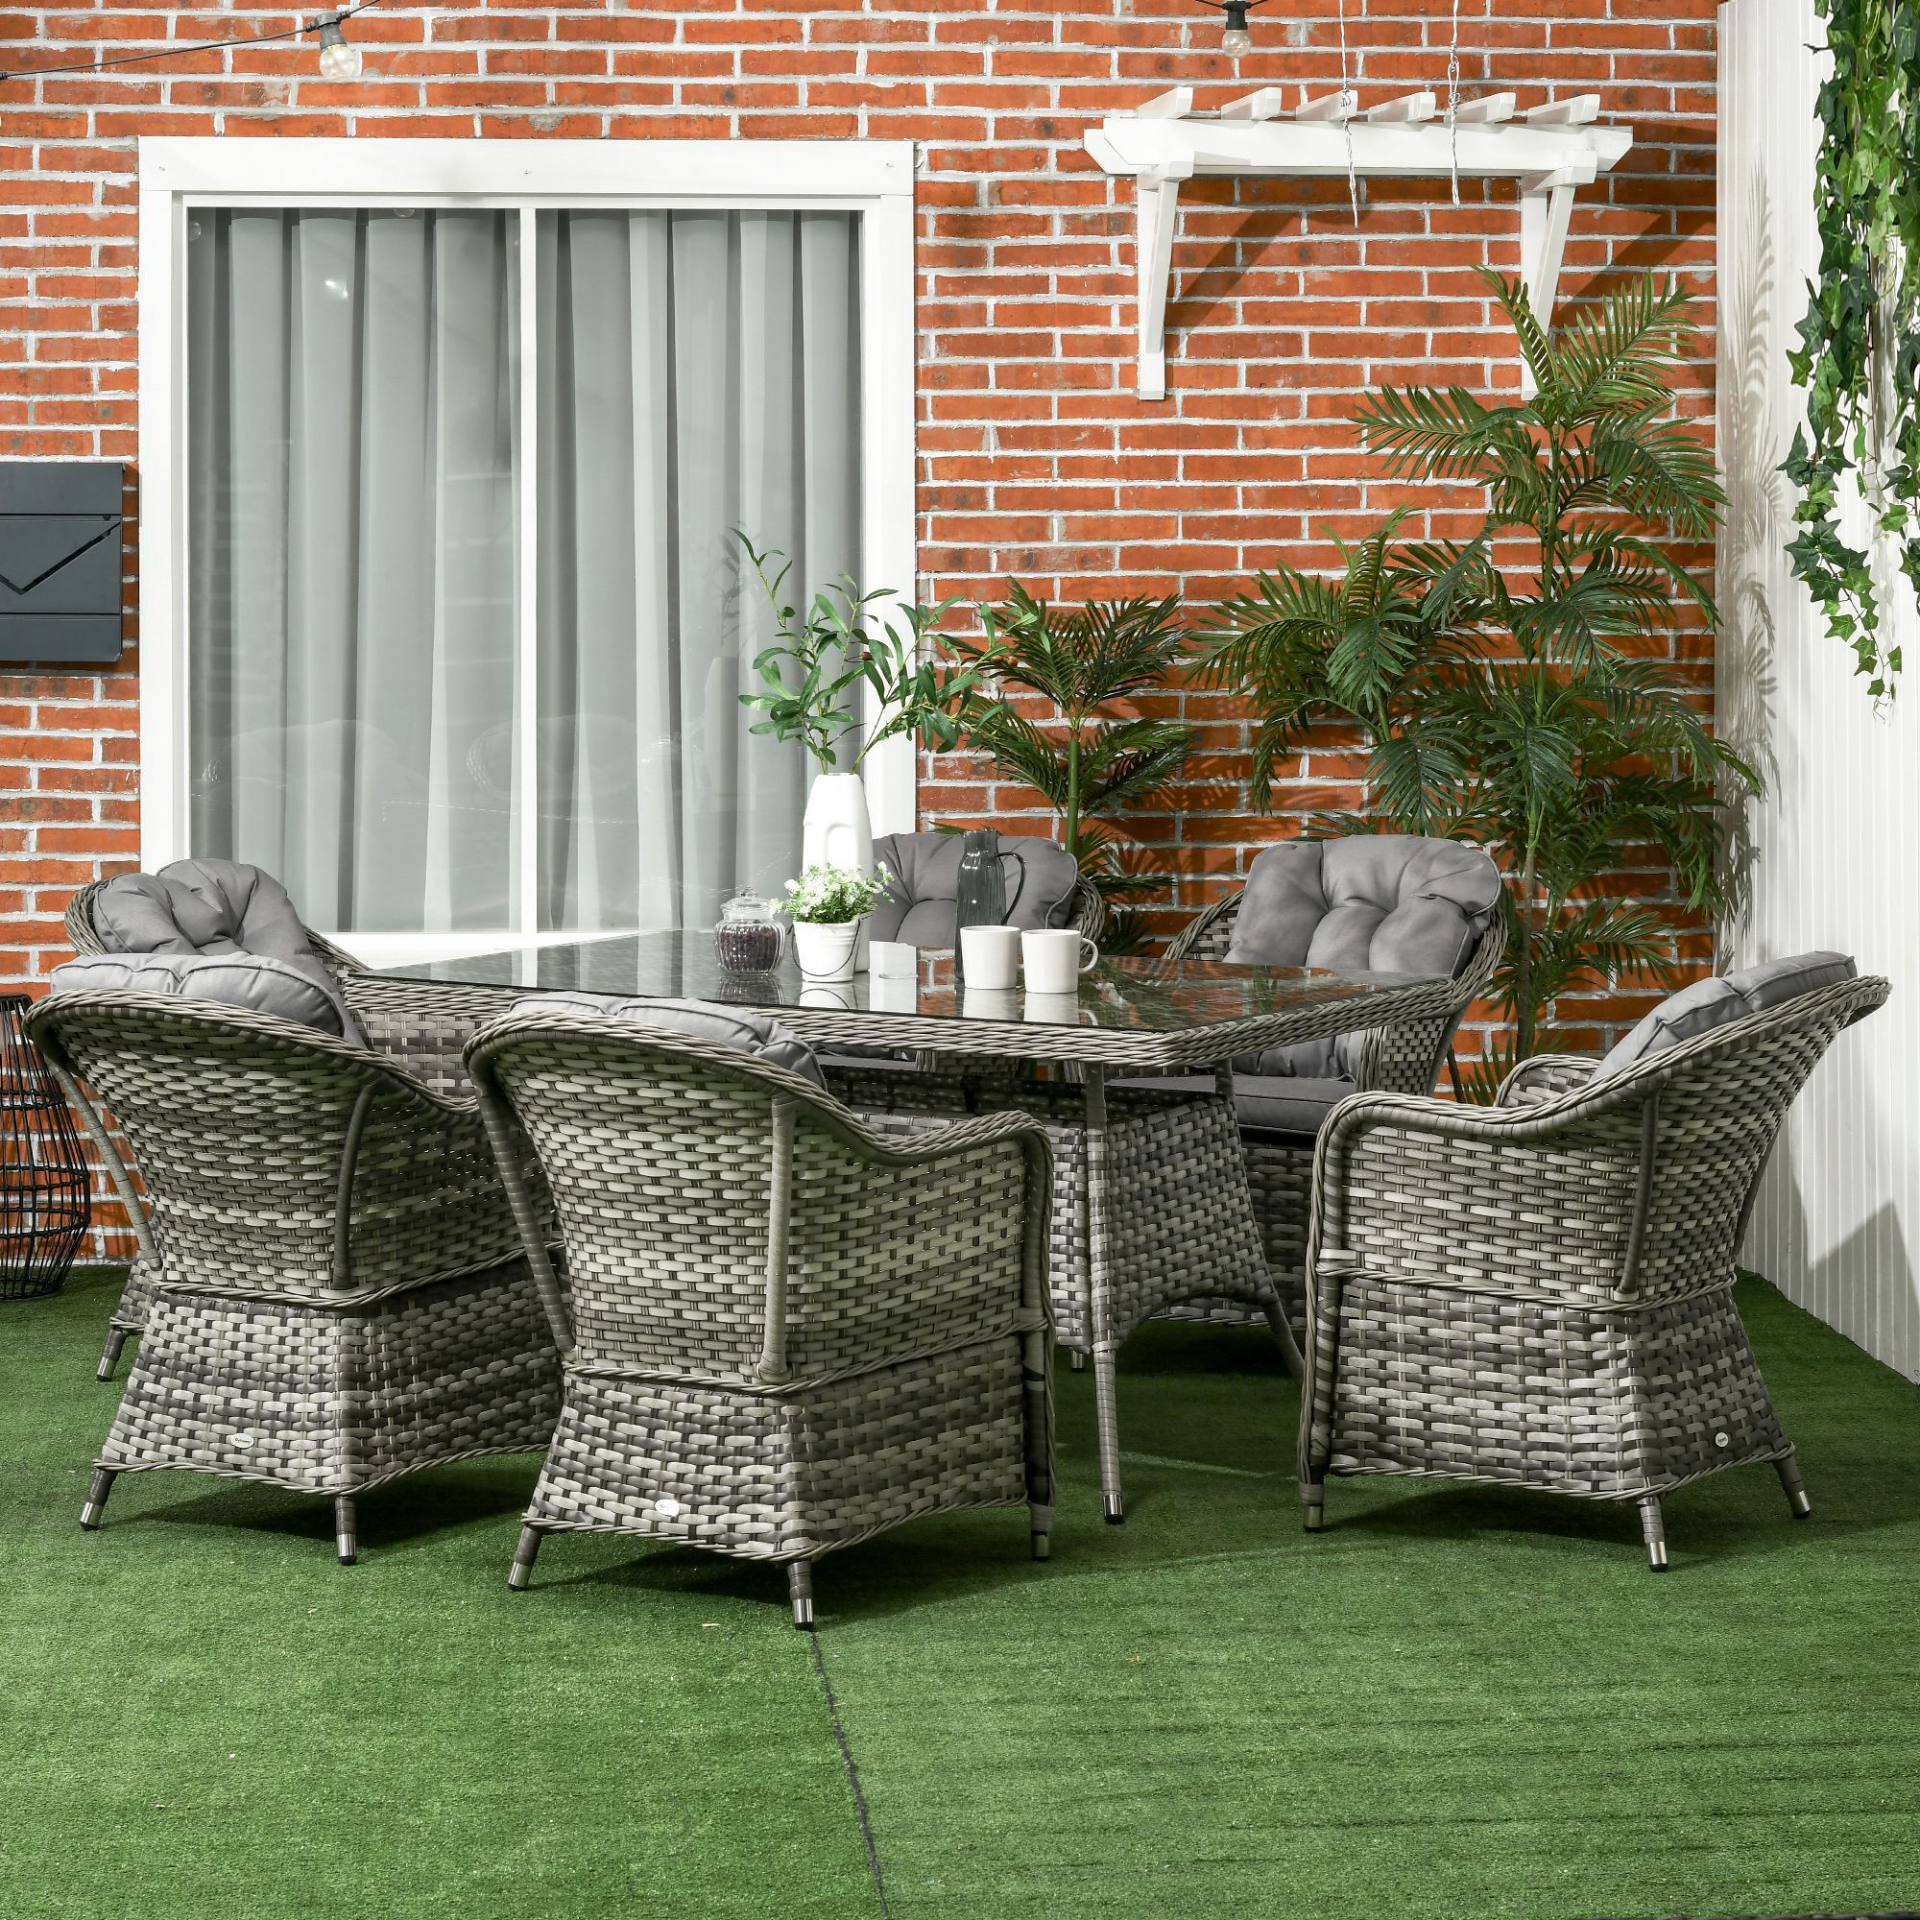 Outsunny 7 PCs Rattan Dining Sets Outdoor Dining Set with Tempered Glass Table